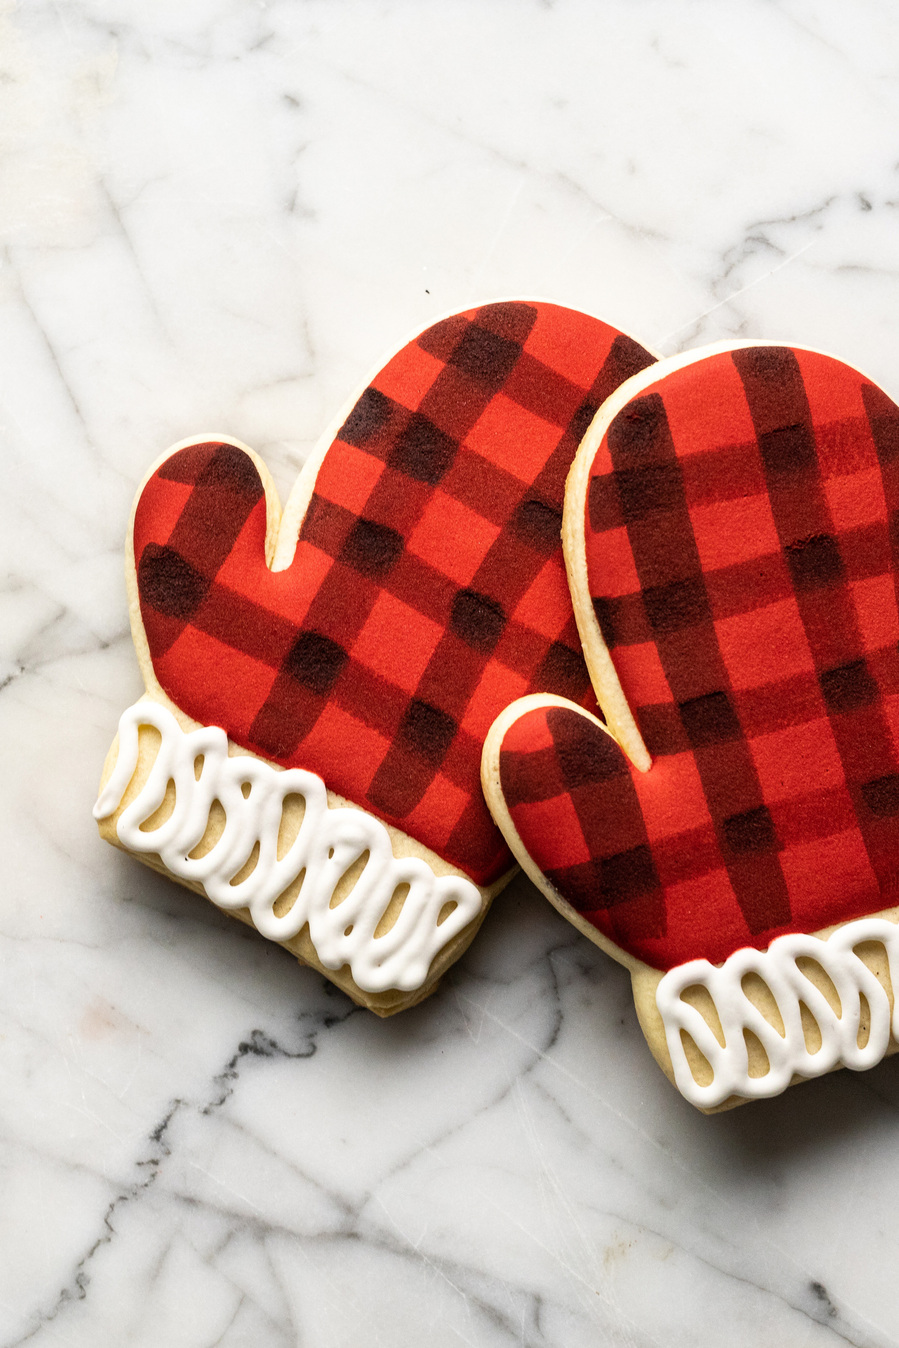 Detail of baking photography that shows the painted buffalo plaid pattern on the iced mitten-shaped cookies